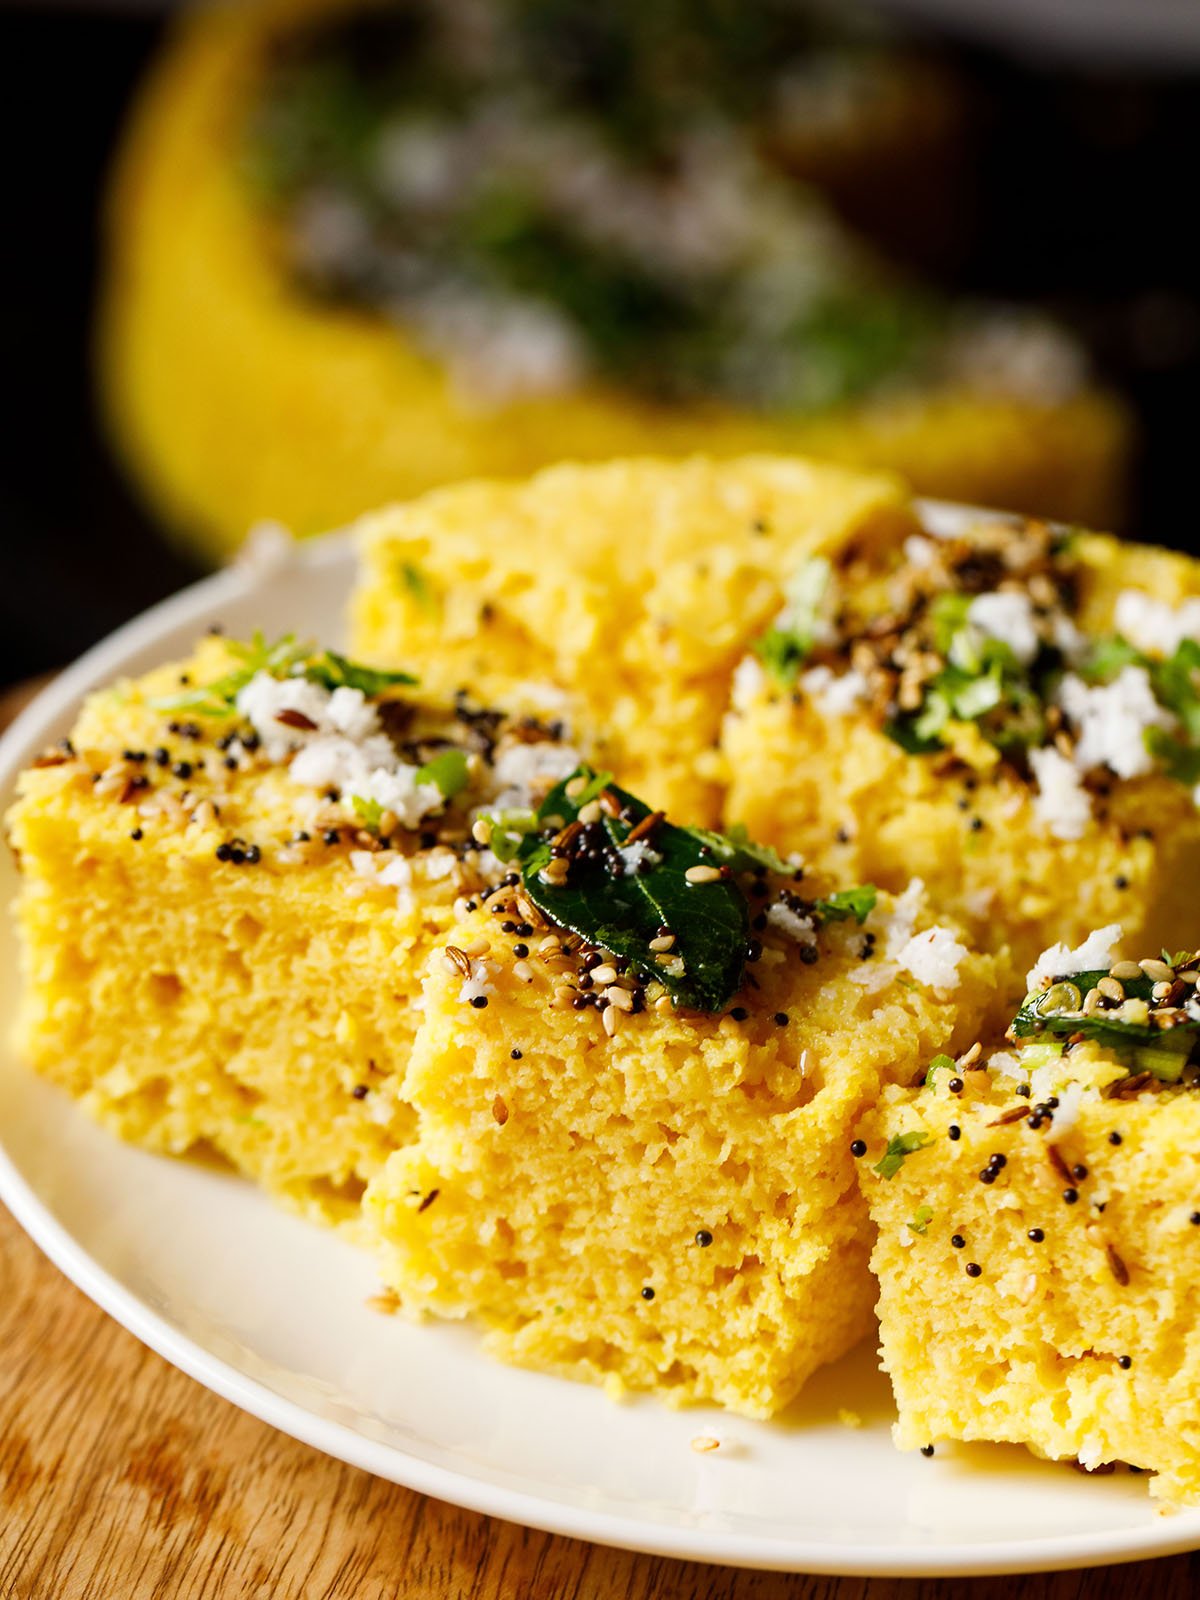 45 degree angle shot of khaman dhokla squares on a white plate garnished with cilantro, curry leaves and the fried curry leaves and spices mixture